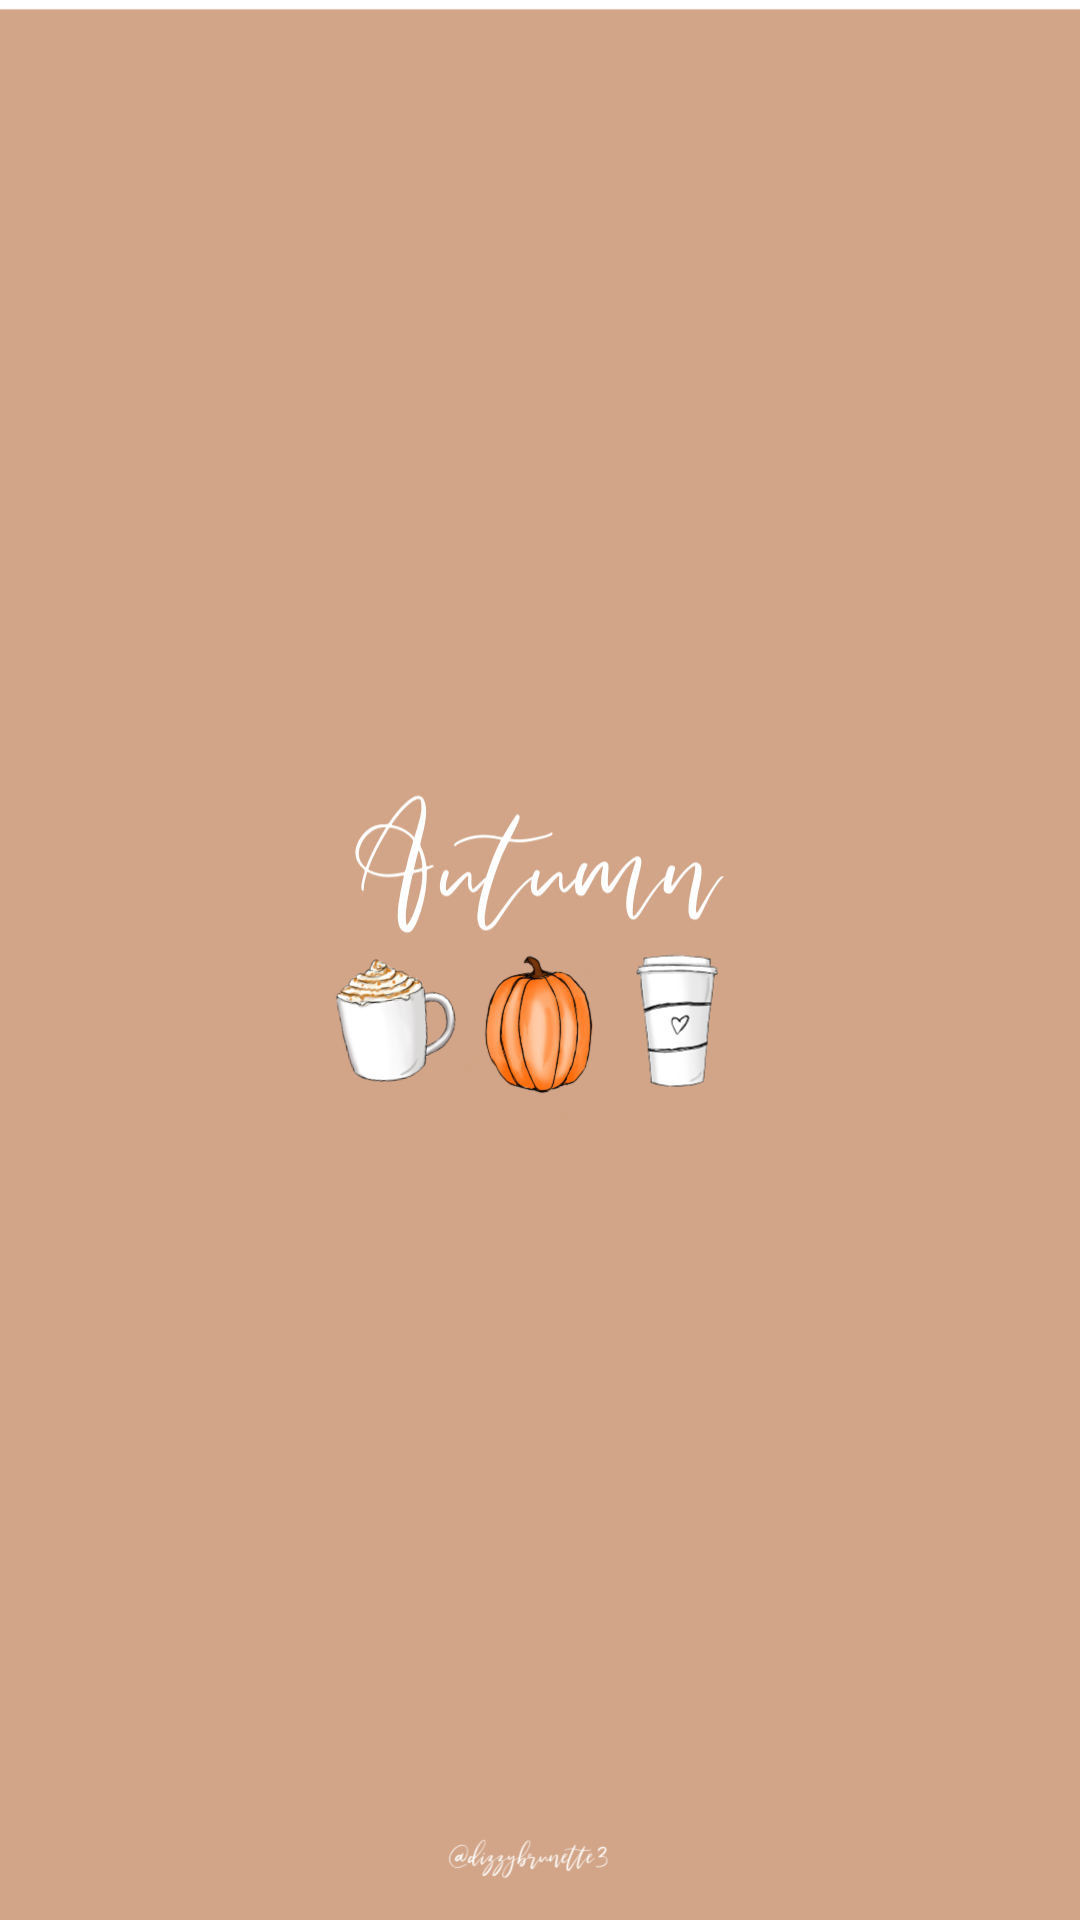 200+ Background Aesthetic Fall Pics - MyWeb